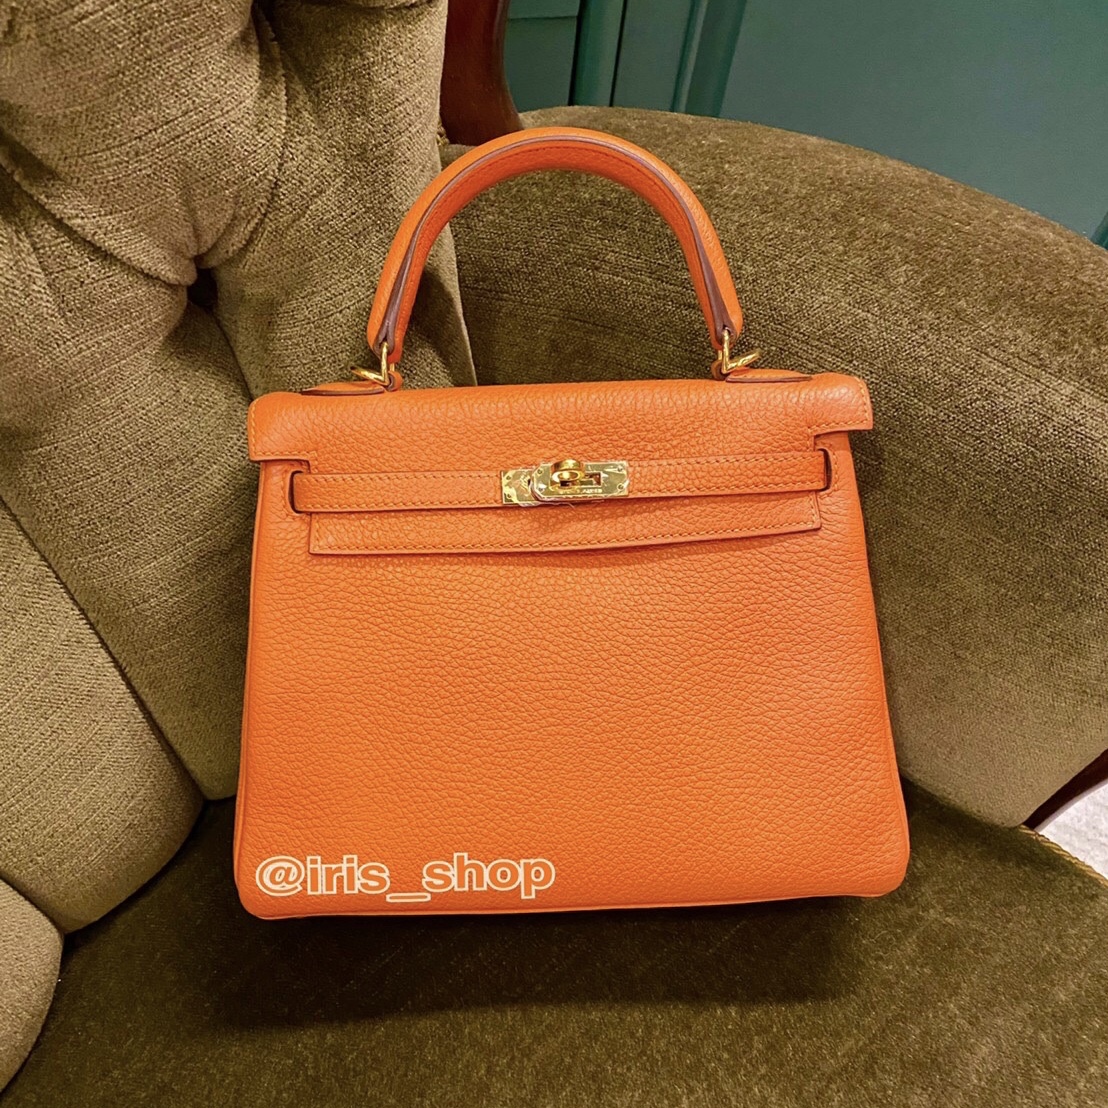 The Most Sought After Hermès Kelly 25